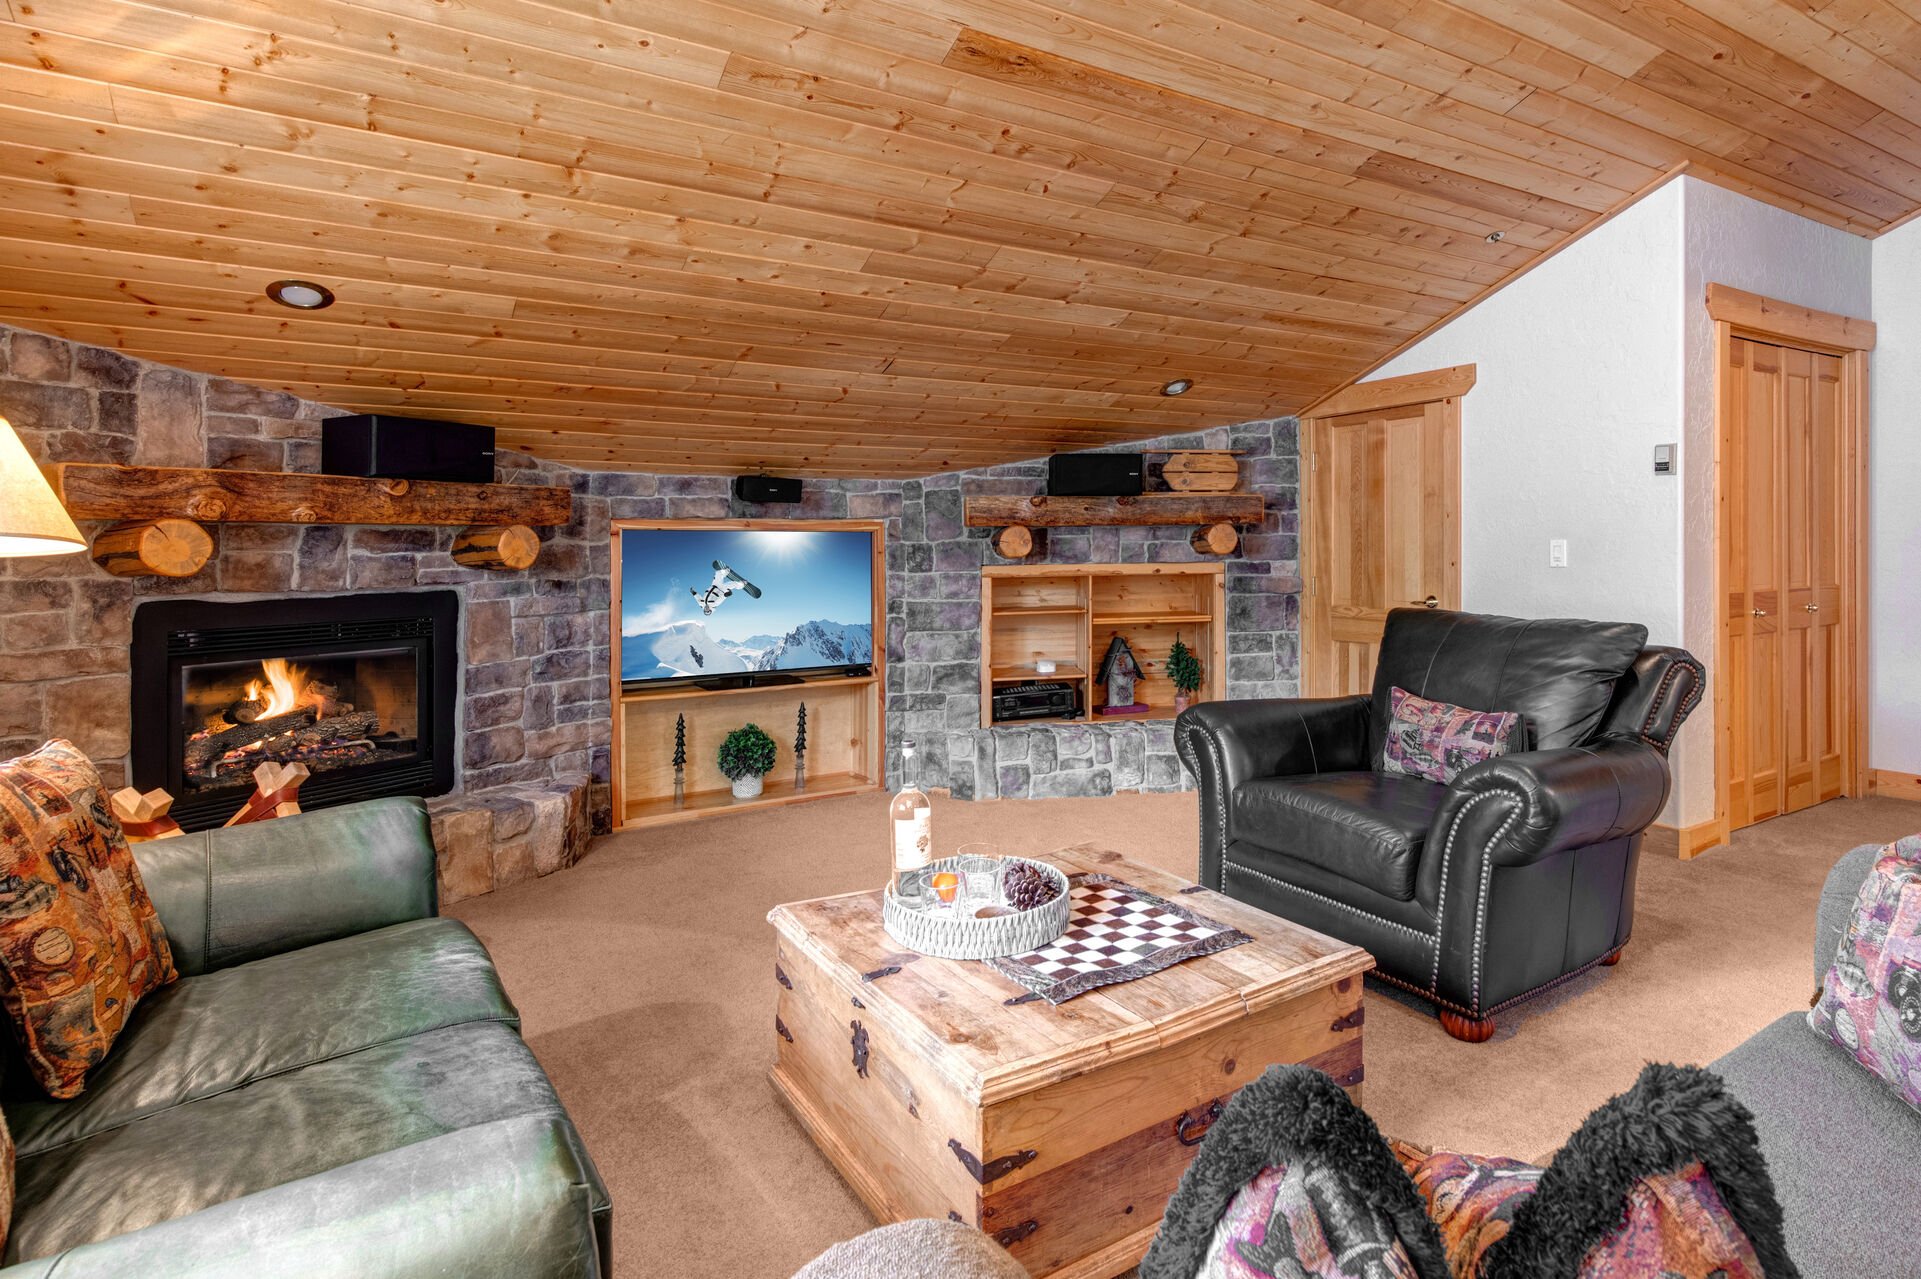 Upper Level Living and Game Room with billiards table, sofa sleeper, smart tv, gas fireplace, and full bath access